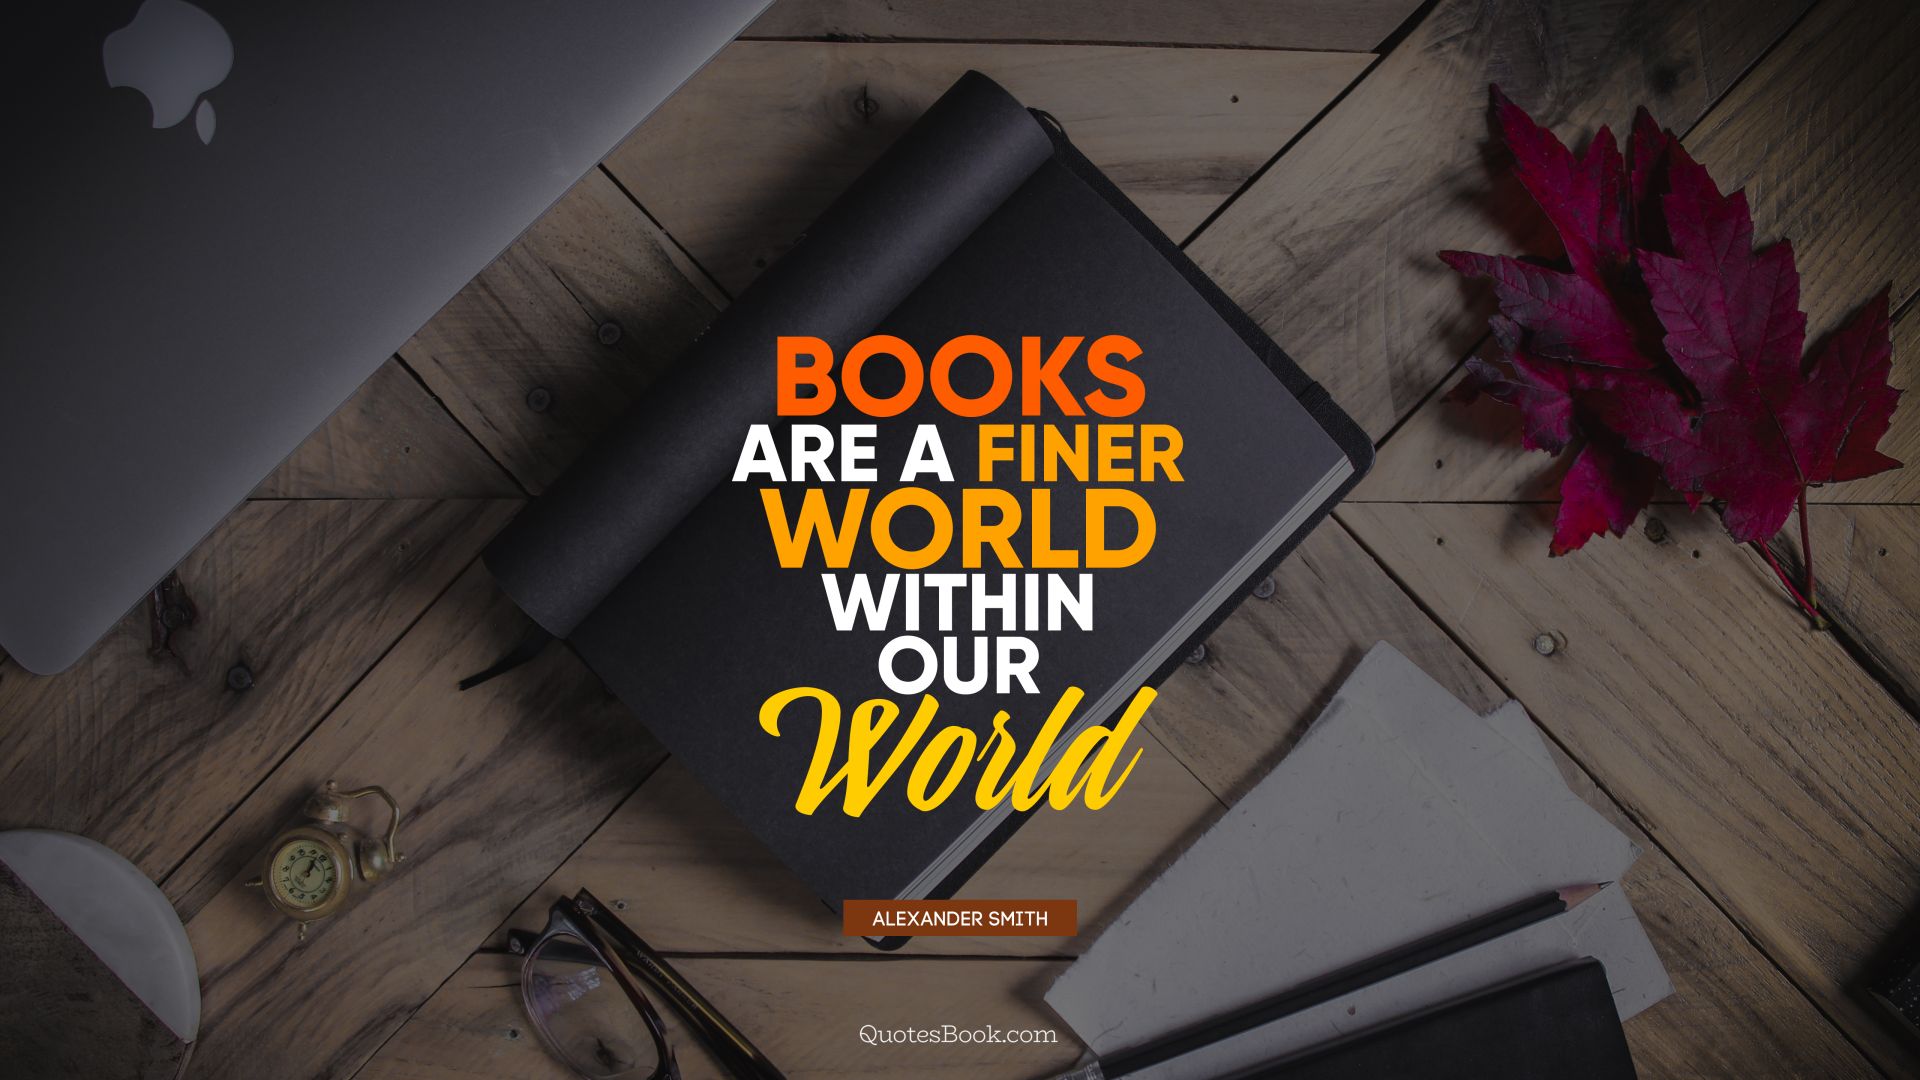 Books are a finer world within our world. - Quote by Alexander Smith